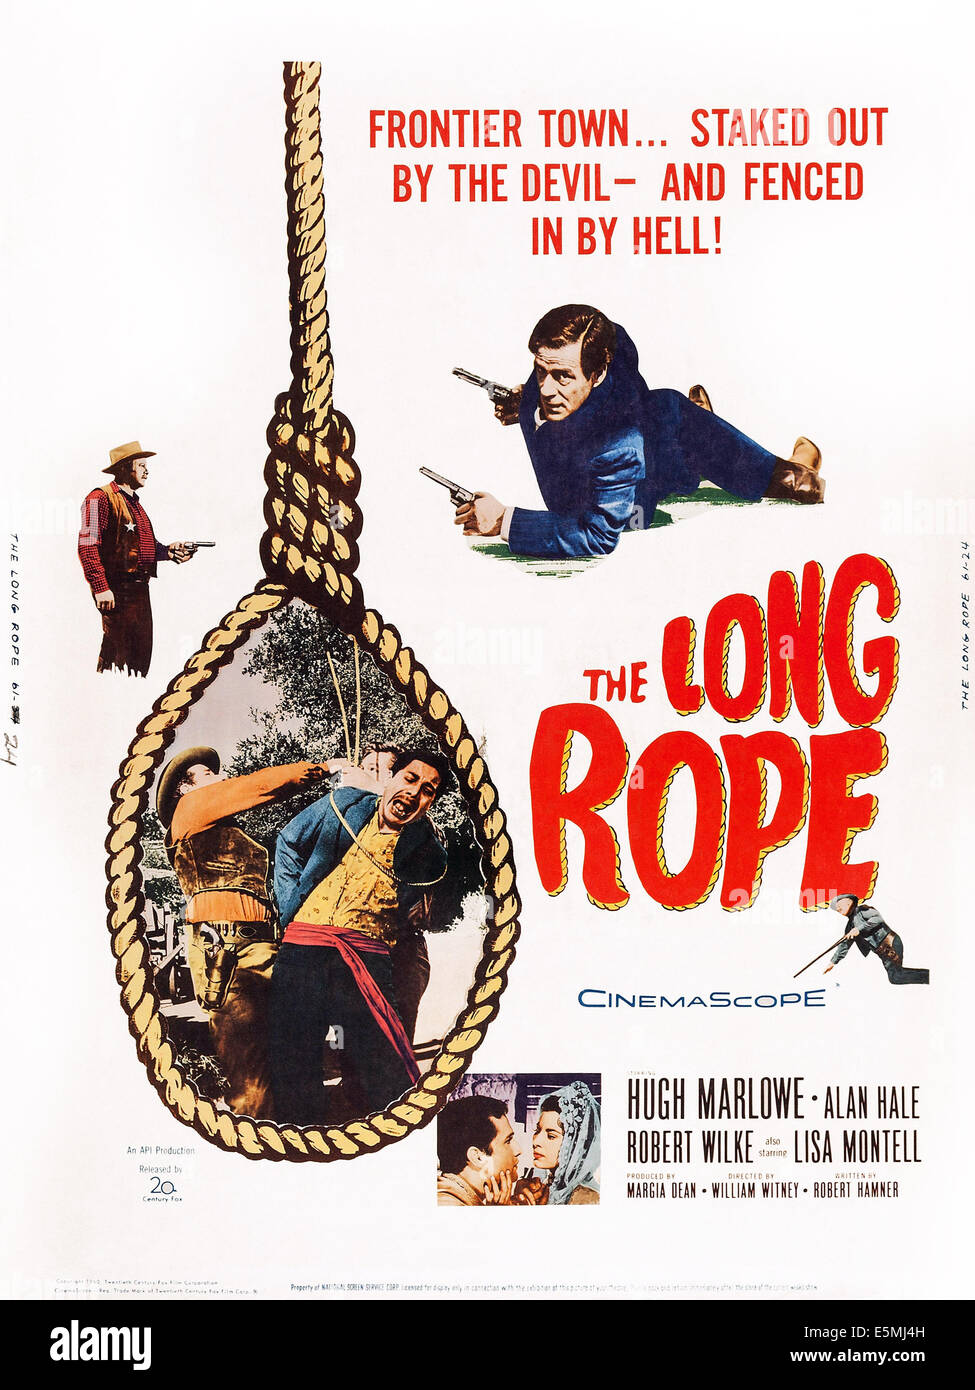 THE LONG ROPE, US poster art, High Marlowe, (top), 1961. TM & Copyright ©20th Century-Fox Film Corp. All rights reserved/ Stock Photo